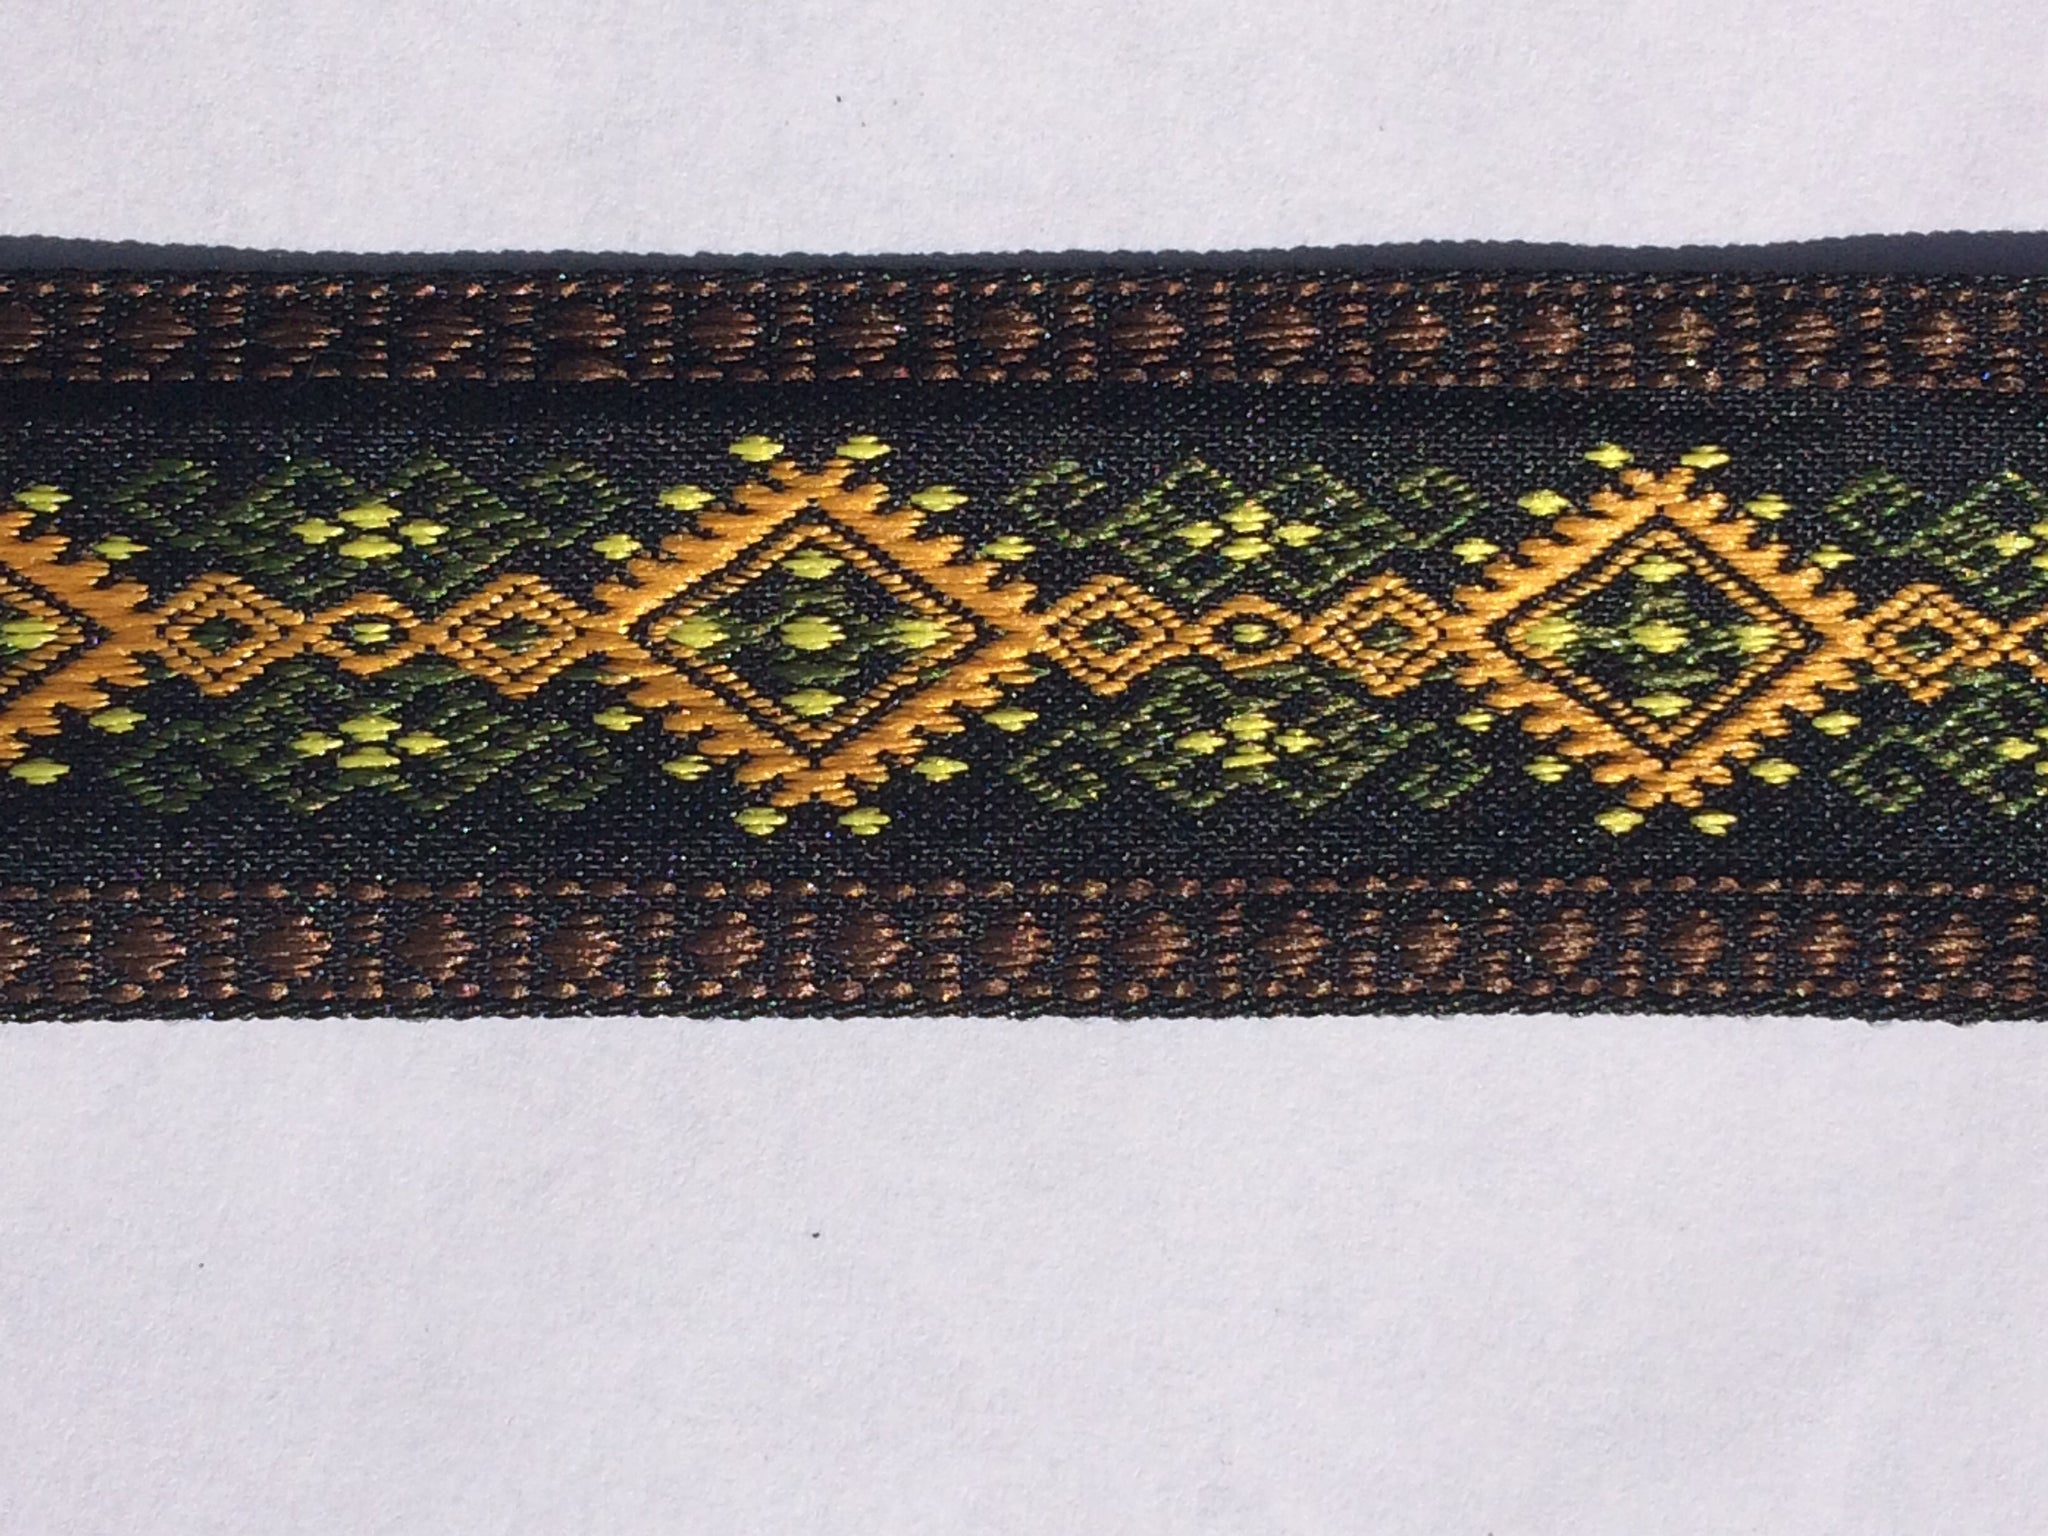 Jacquard Fabric Sewing Trims for Costuming and Crafts – Celtic Trims